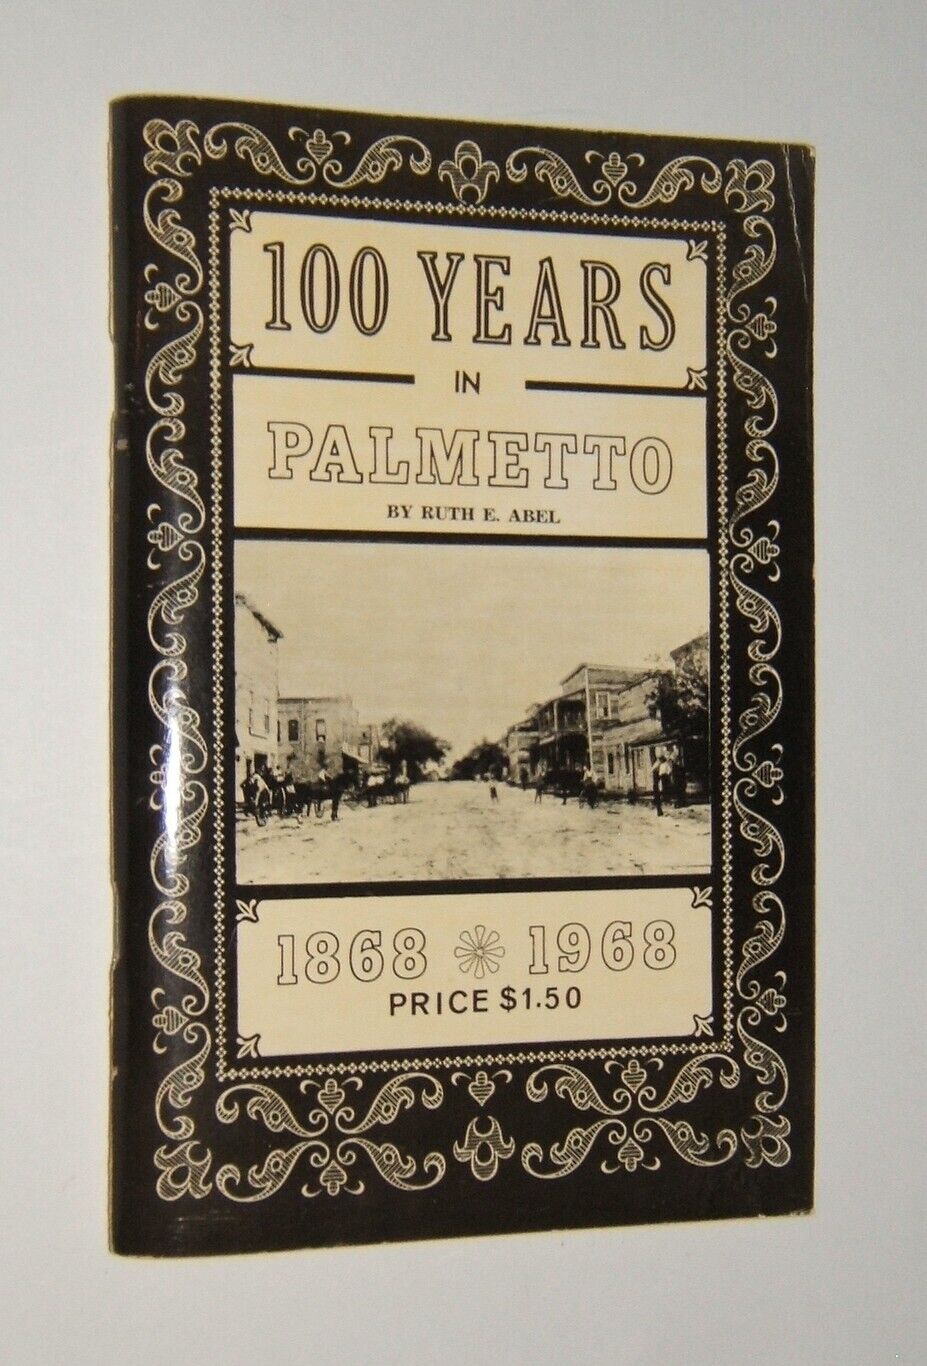 One Hundred Years in Palmetto, 1868-1968 by Ruth E. Abel – Florida - History